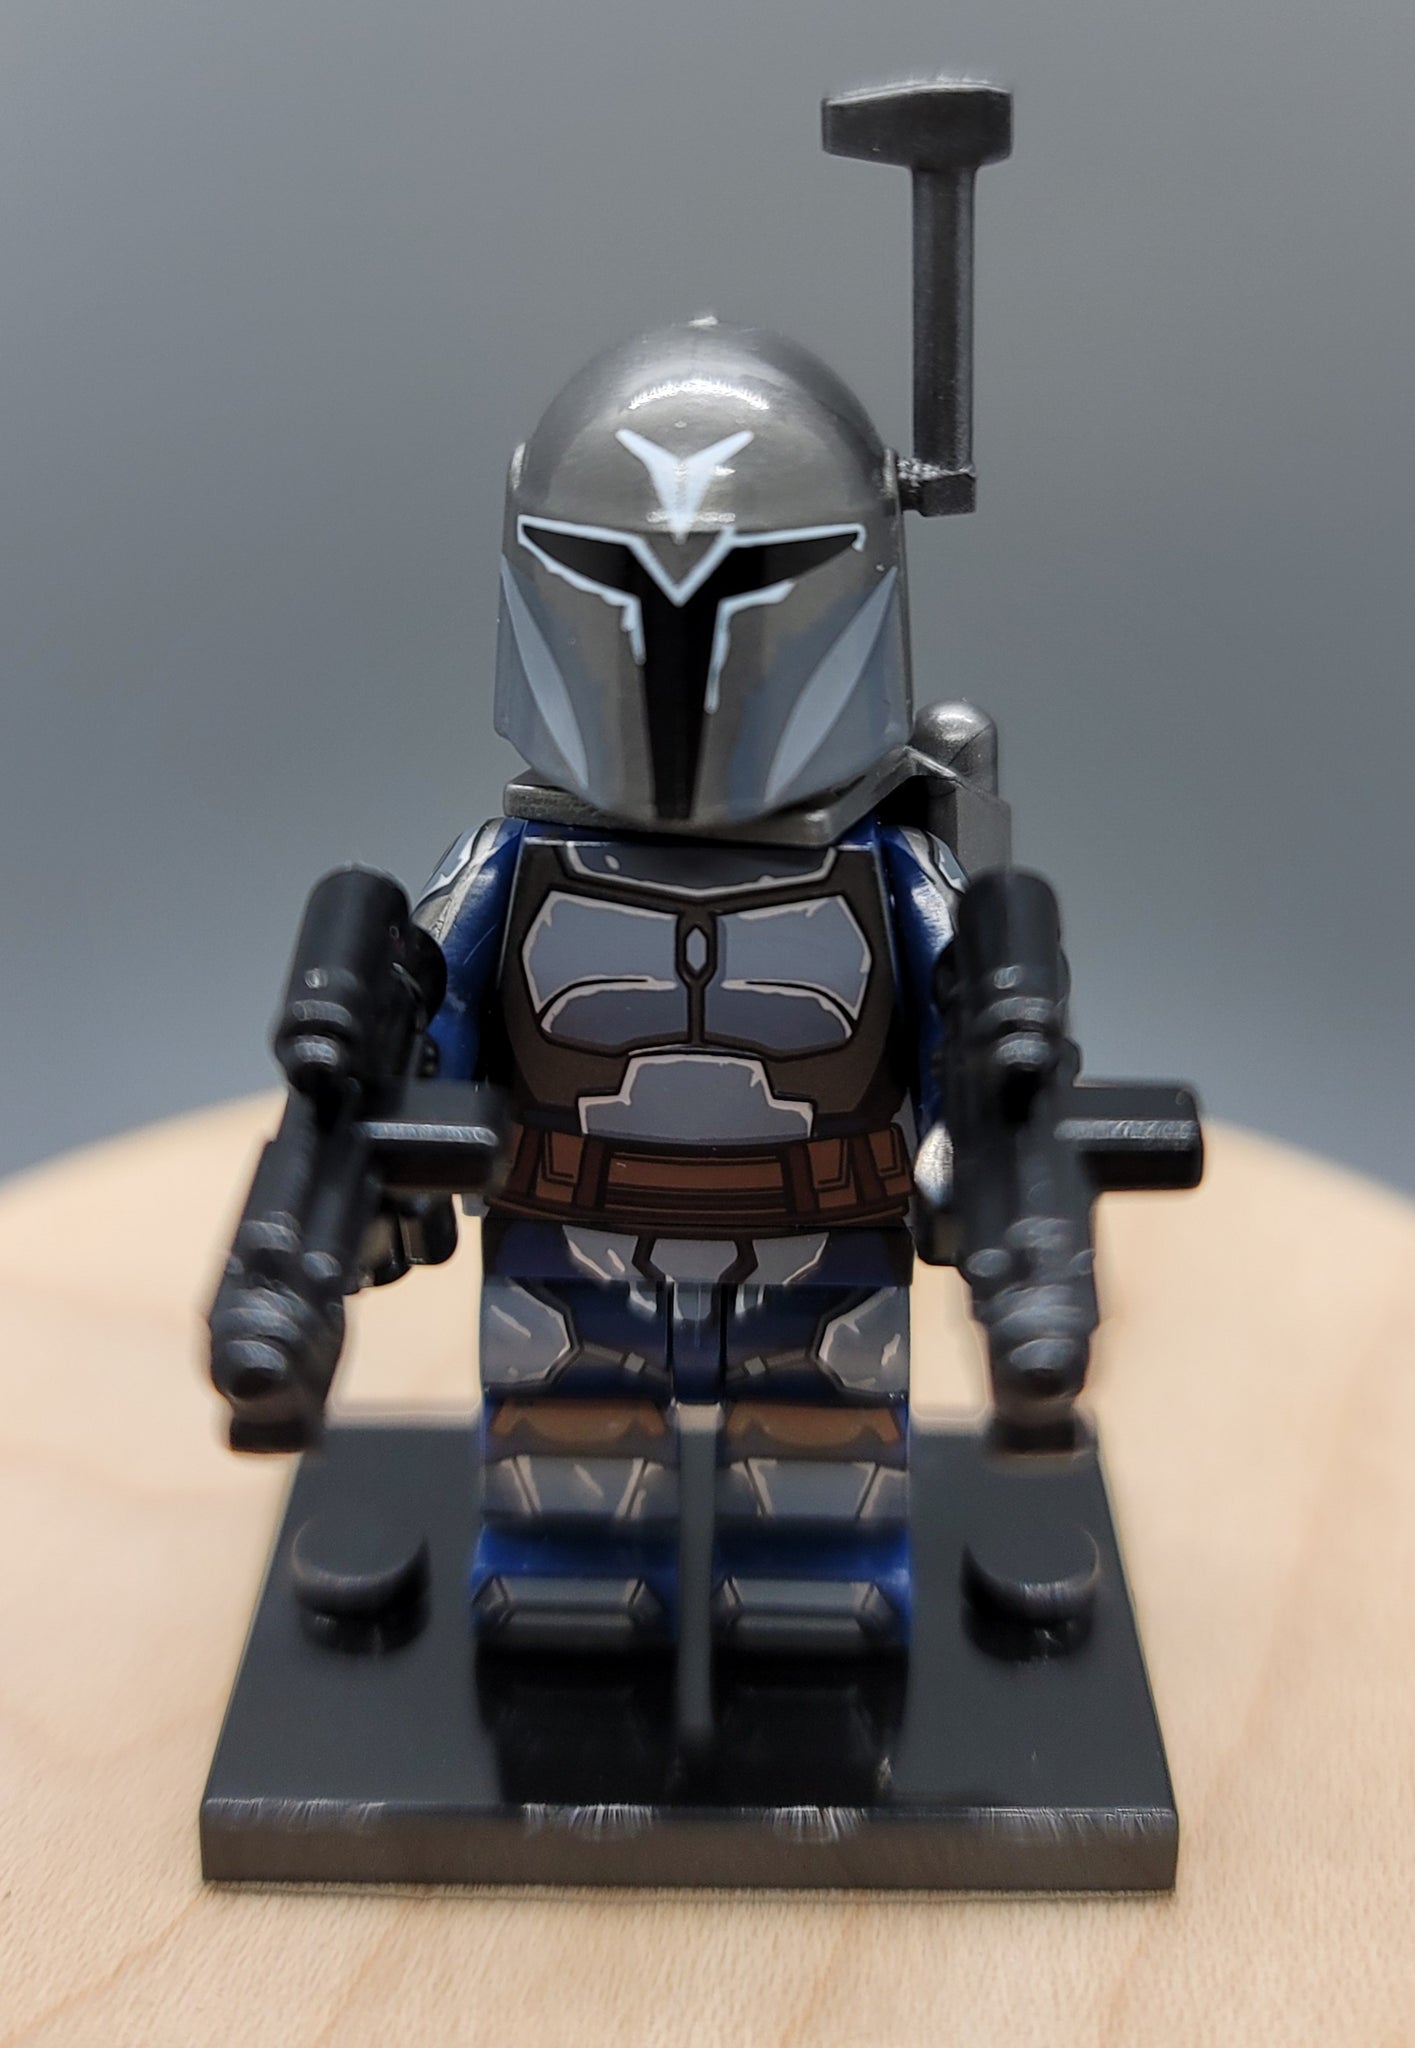 Deathwatch Custom minifigure. Brand new in package. Please visit shop, lots more!